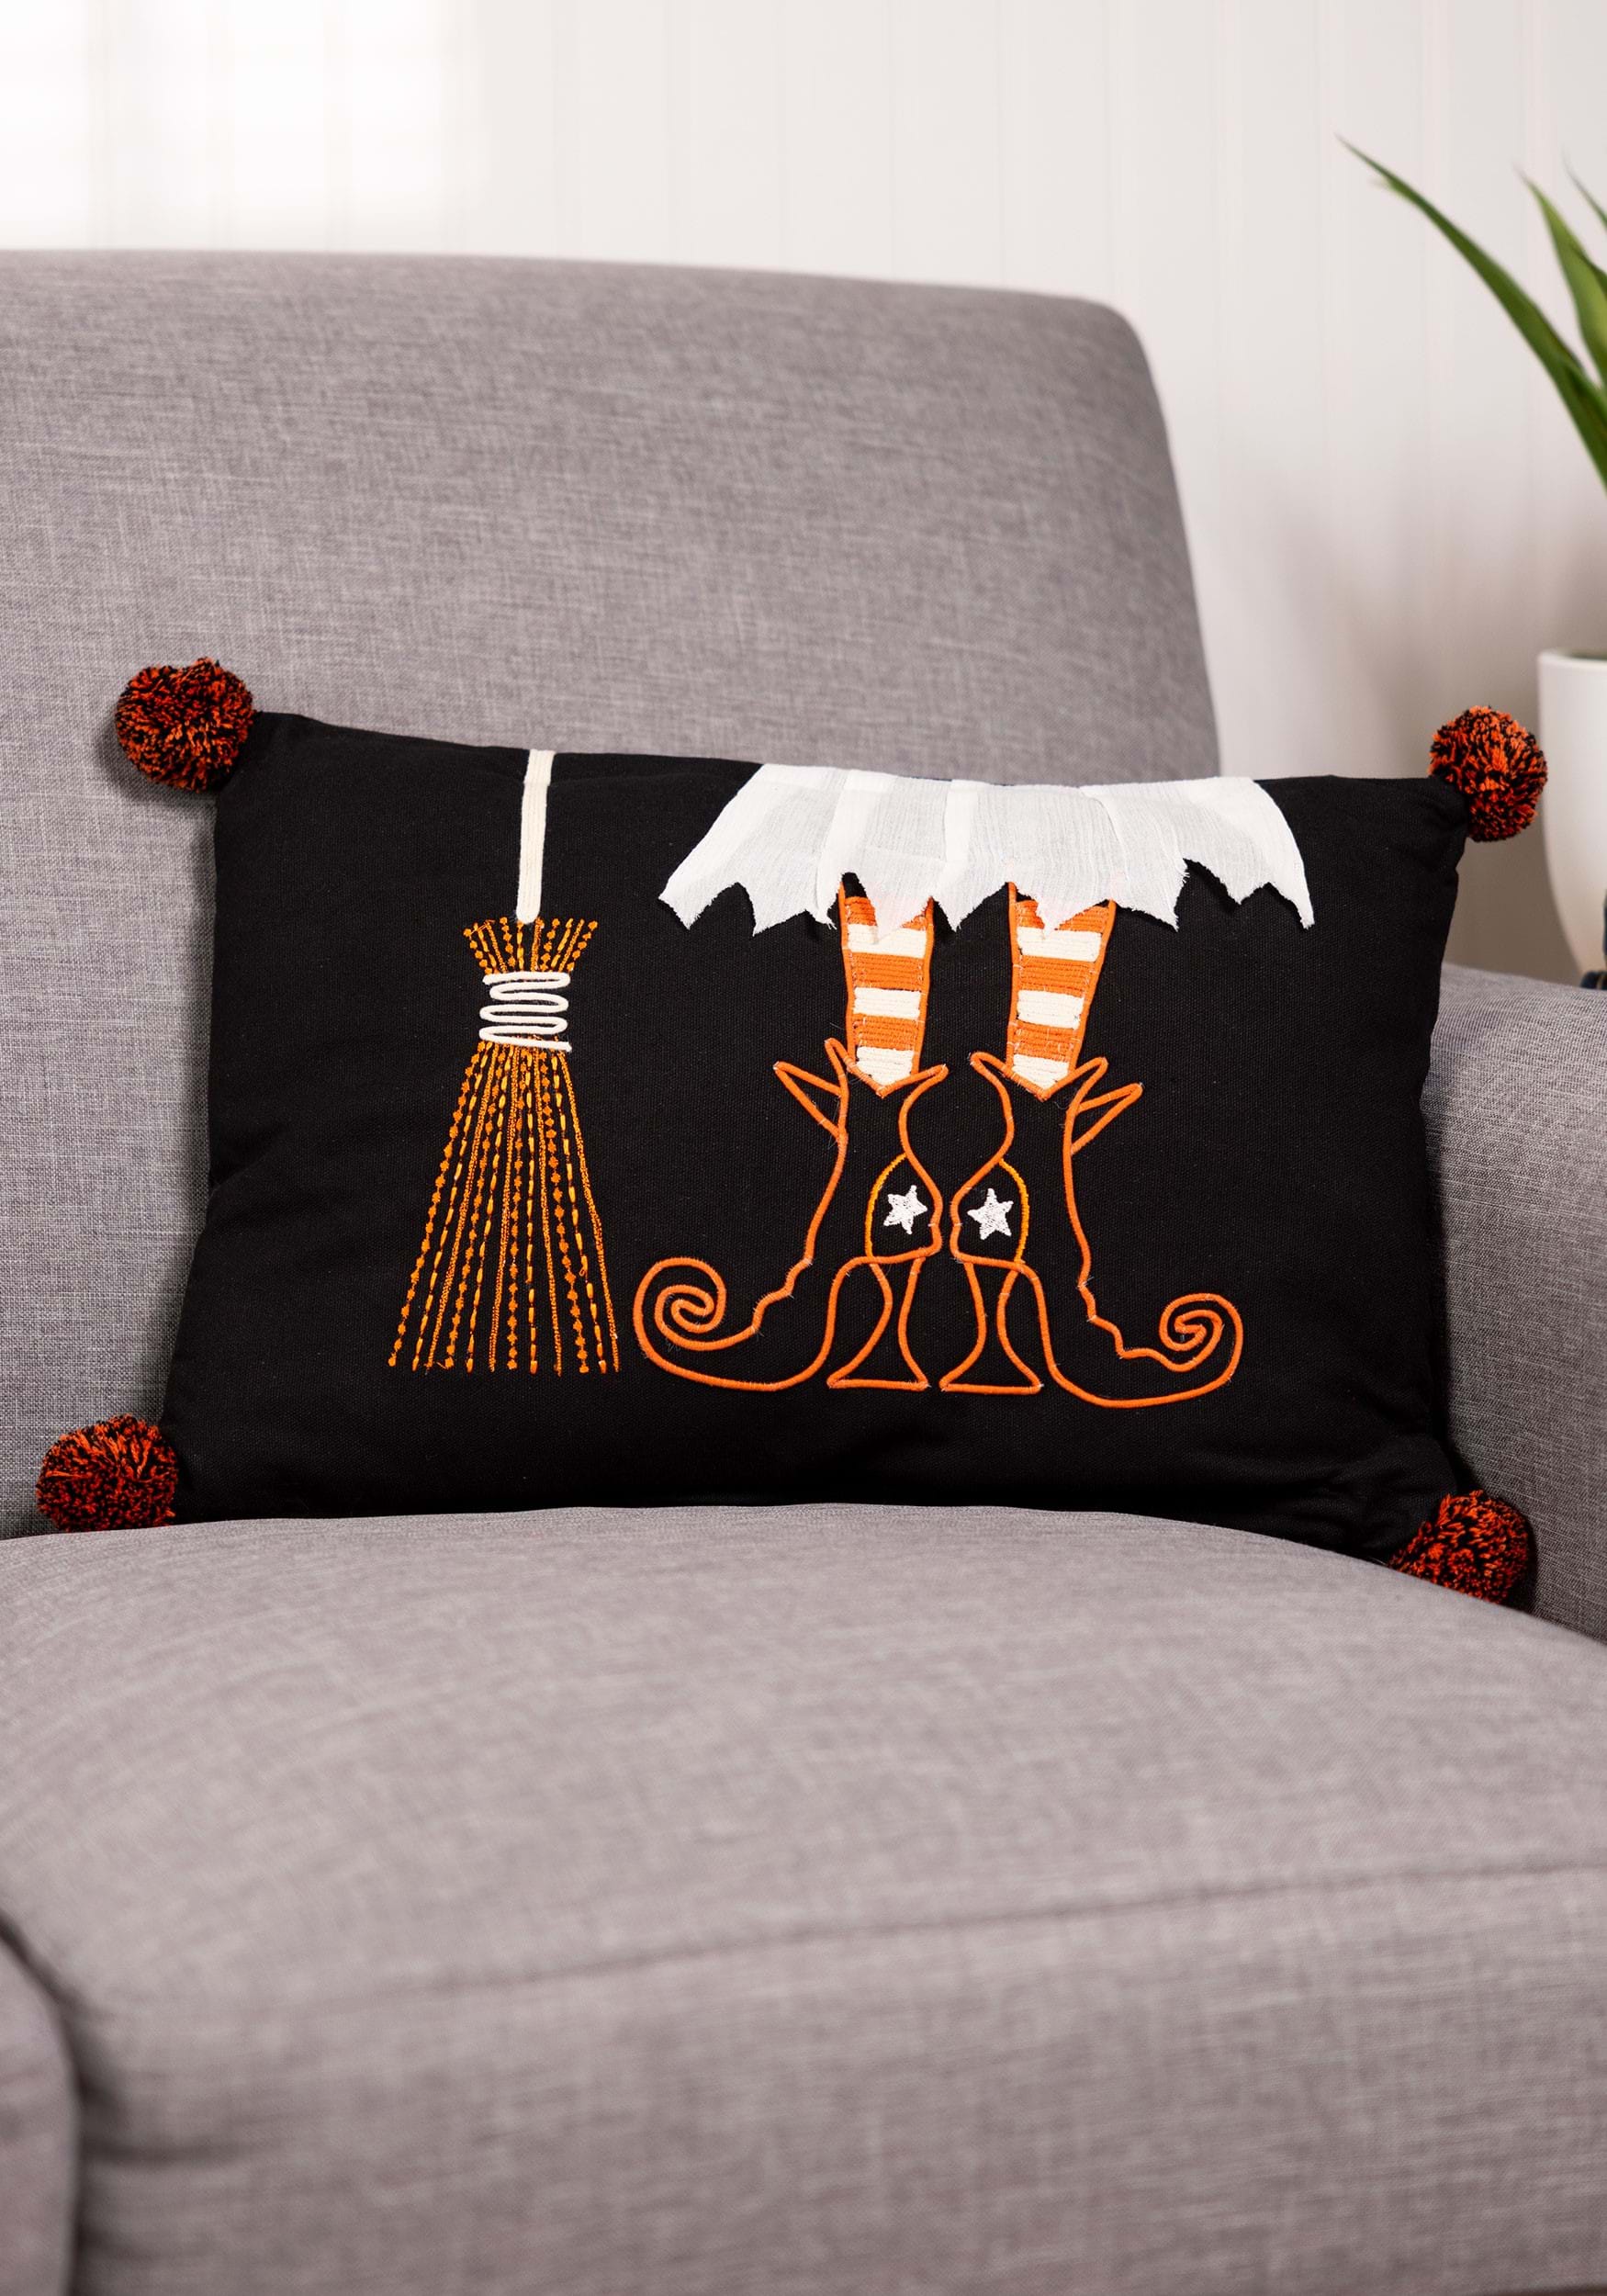 Rectangular Witch Boot And Broom Halloween Pillow Decoration